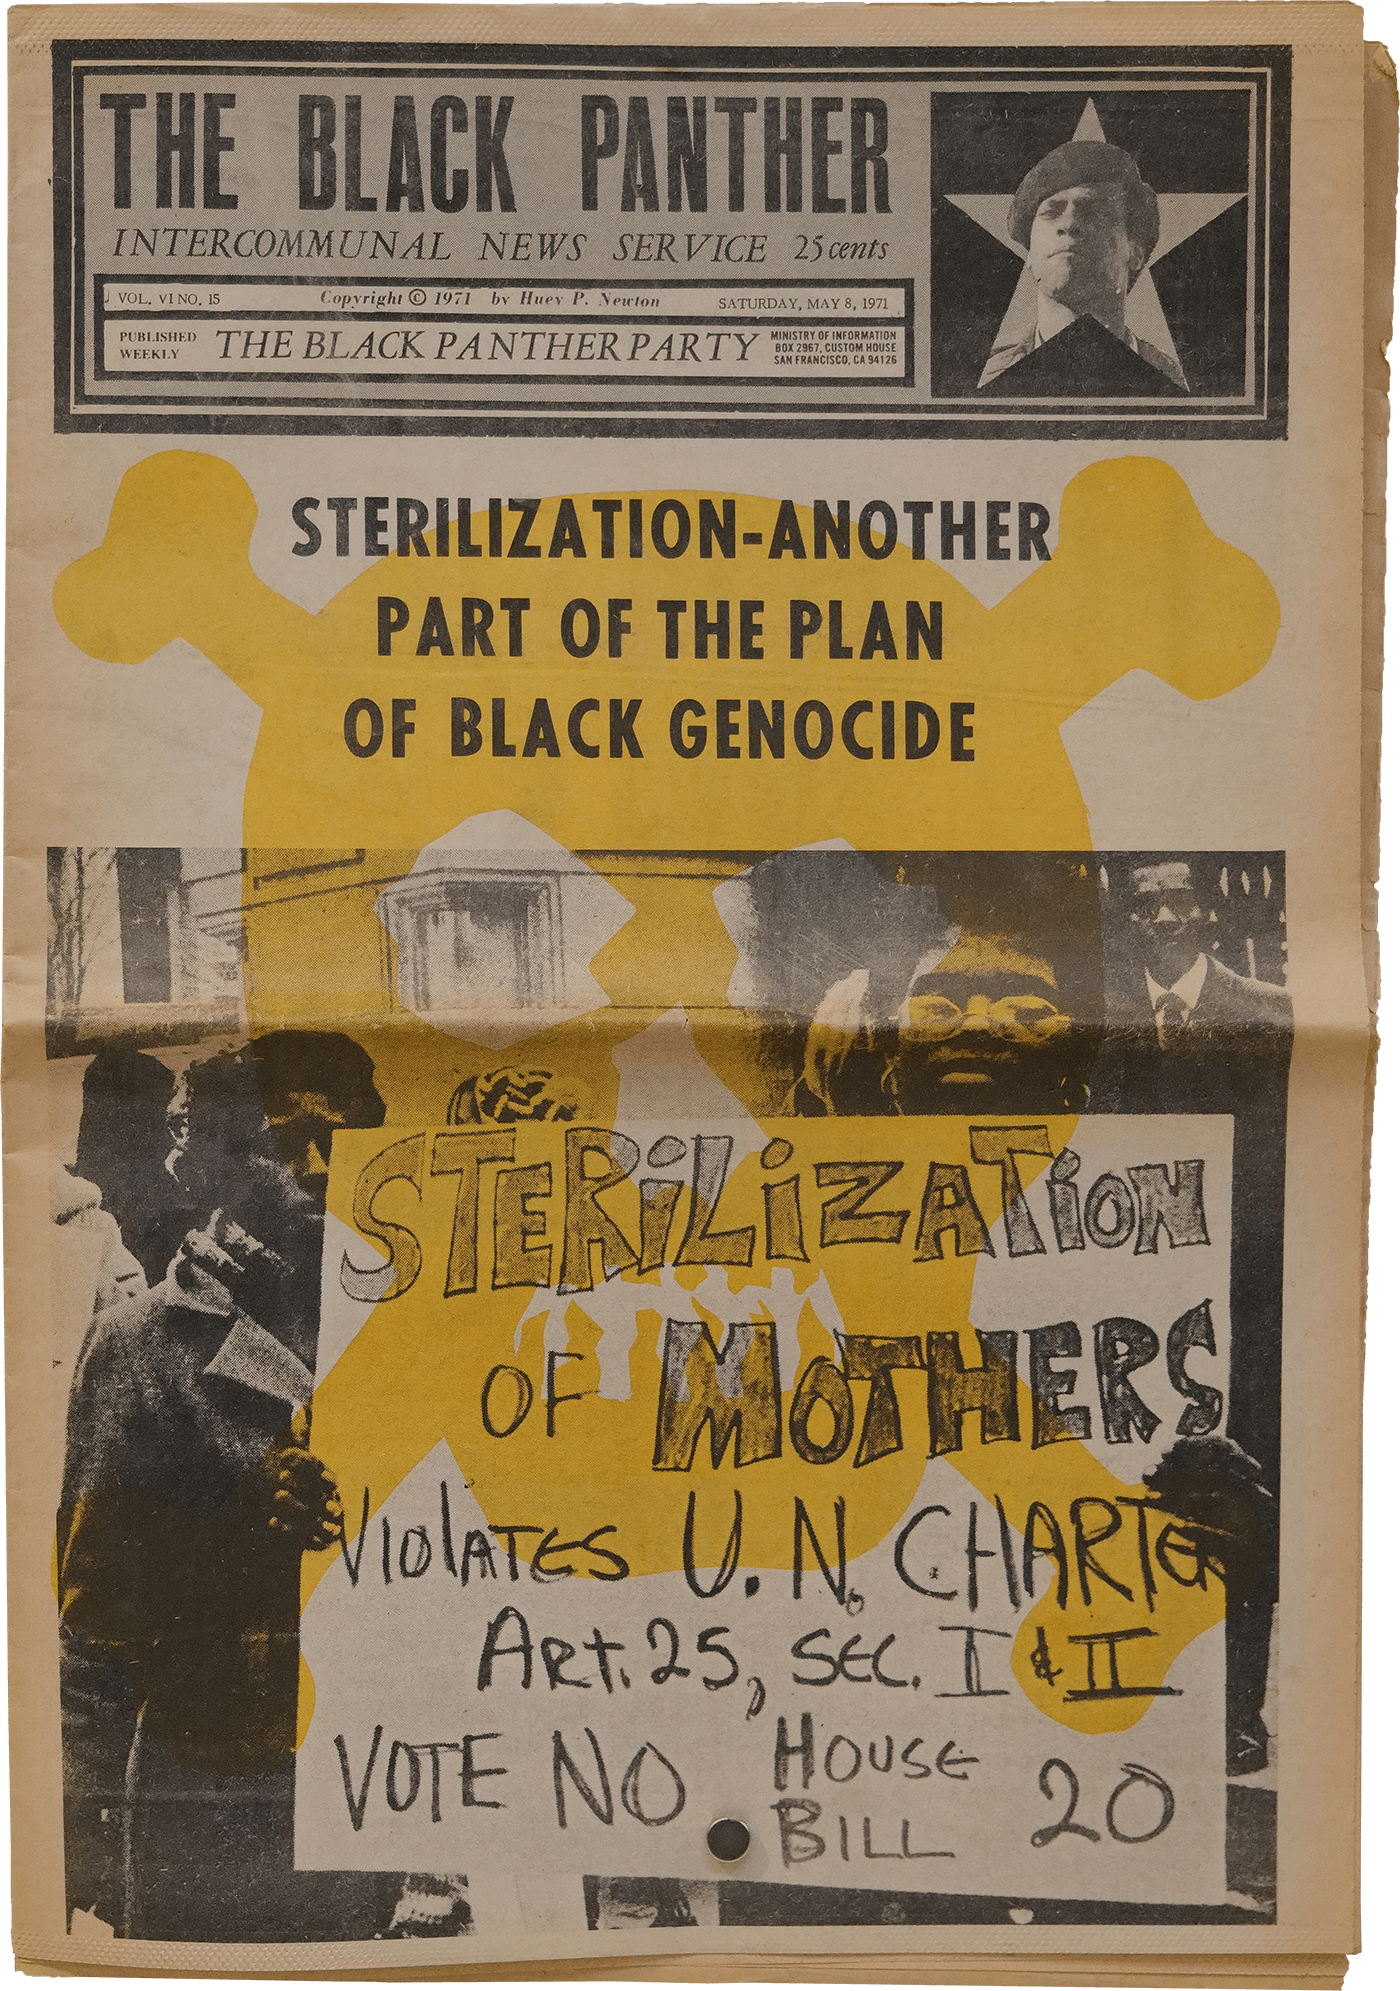 The Black Panther Newspaper (May 8, 1971)